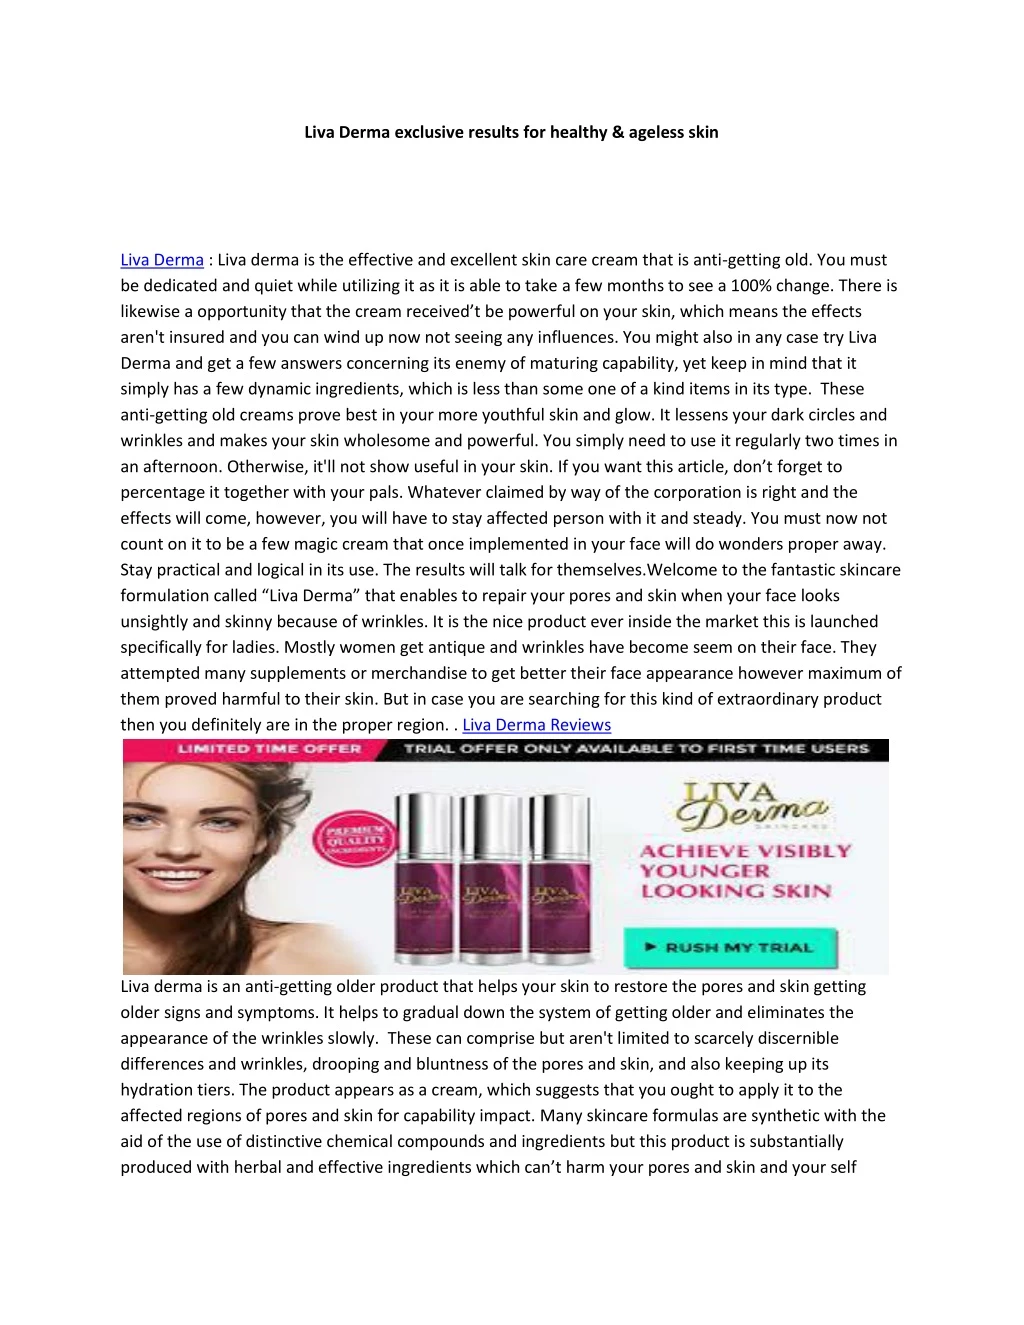 liva derma exclusive results for healthy ageless